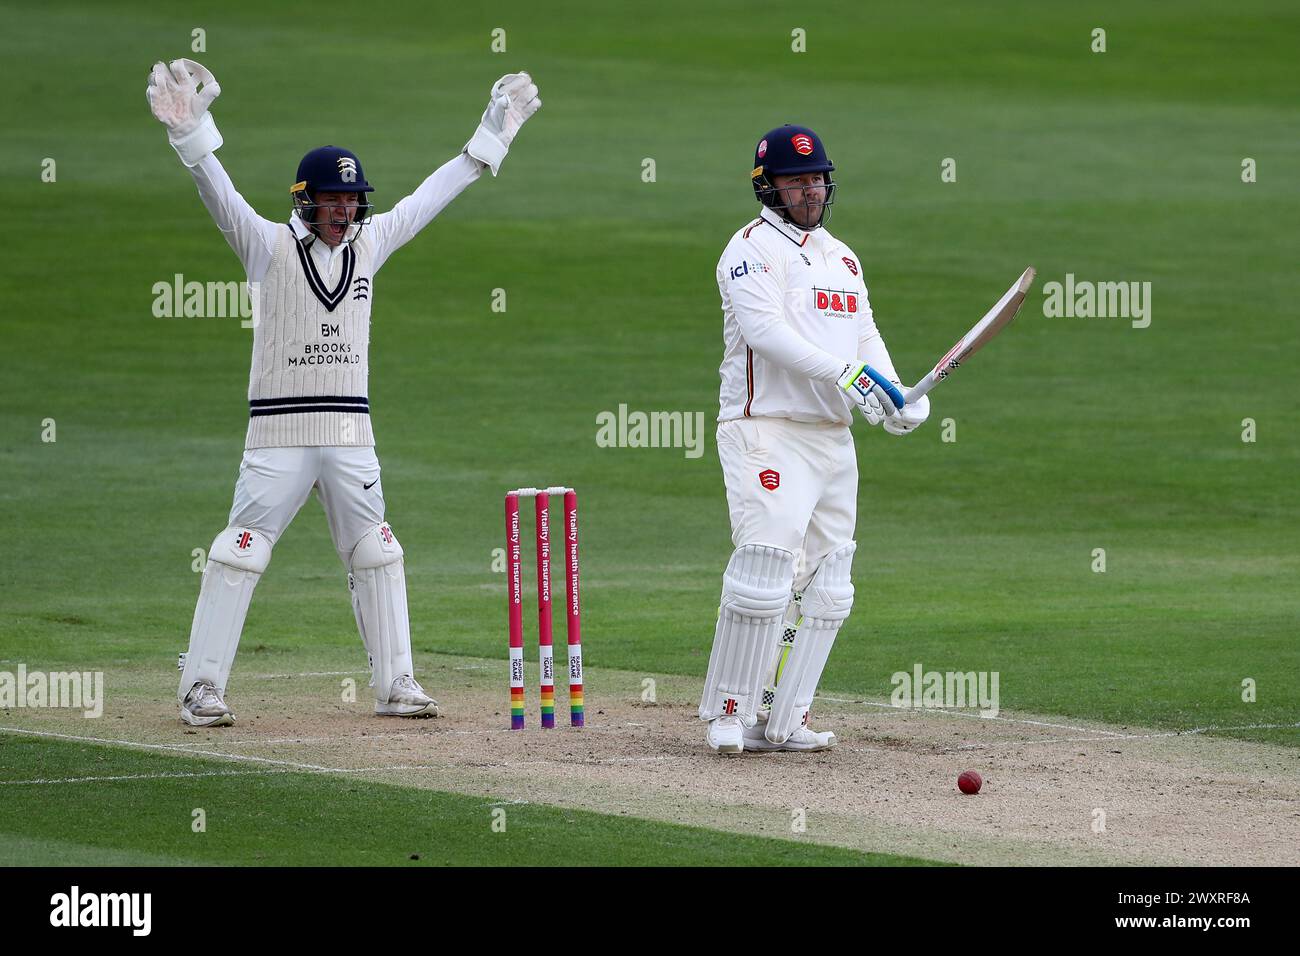 Jack Davies of Middlesex successfully appeals for the wicket of Adam Rossington from the bowling of Josh de Caires during Essex CCC vs Middlesex CCC, Stock Photo